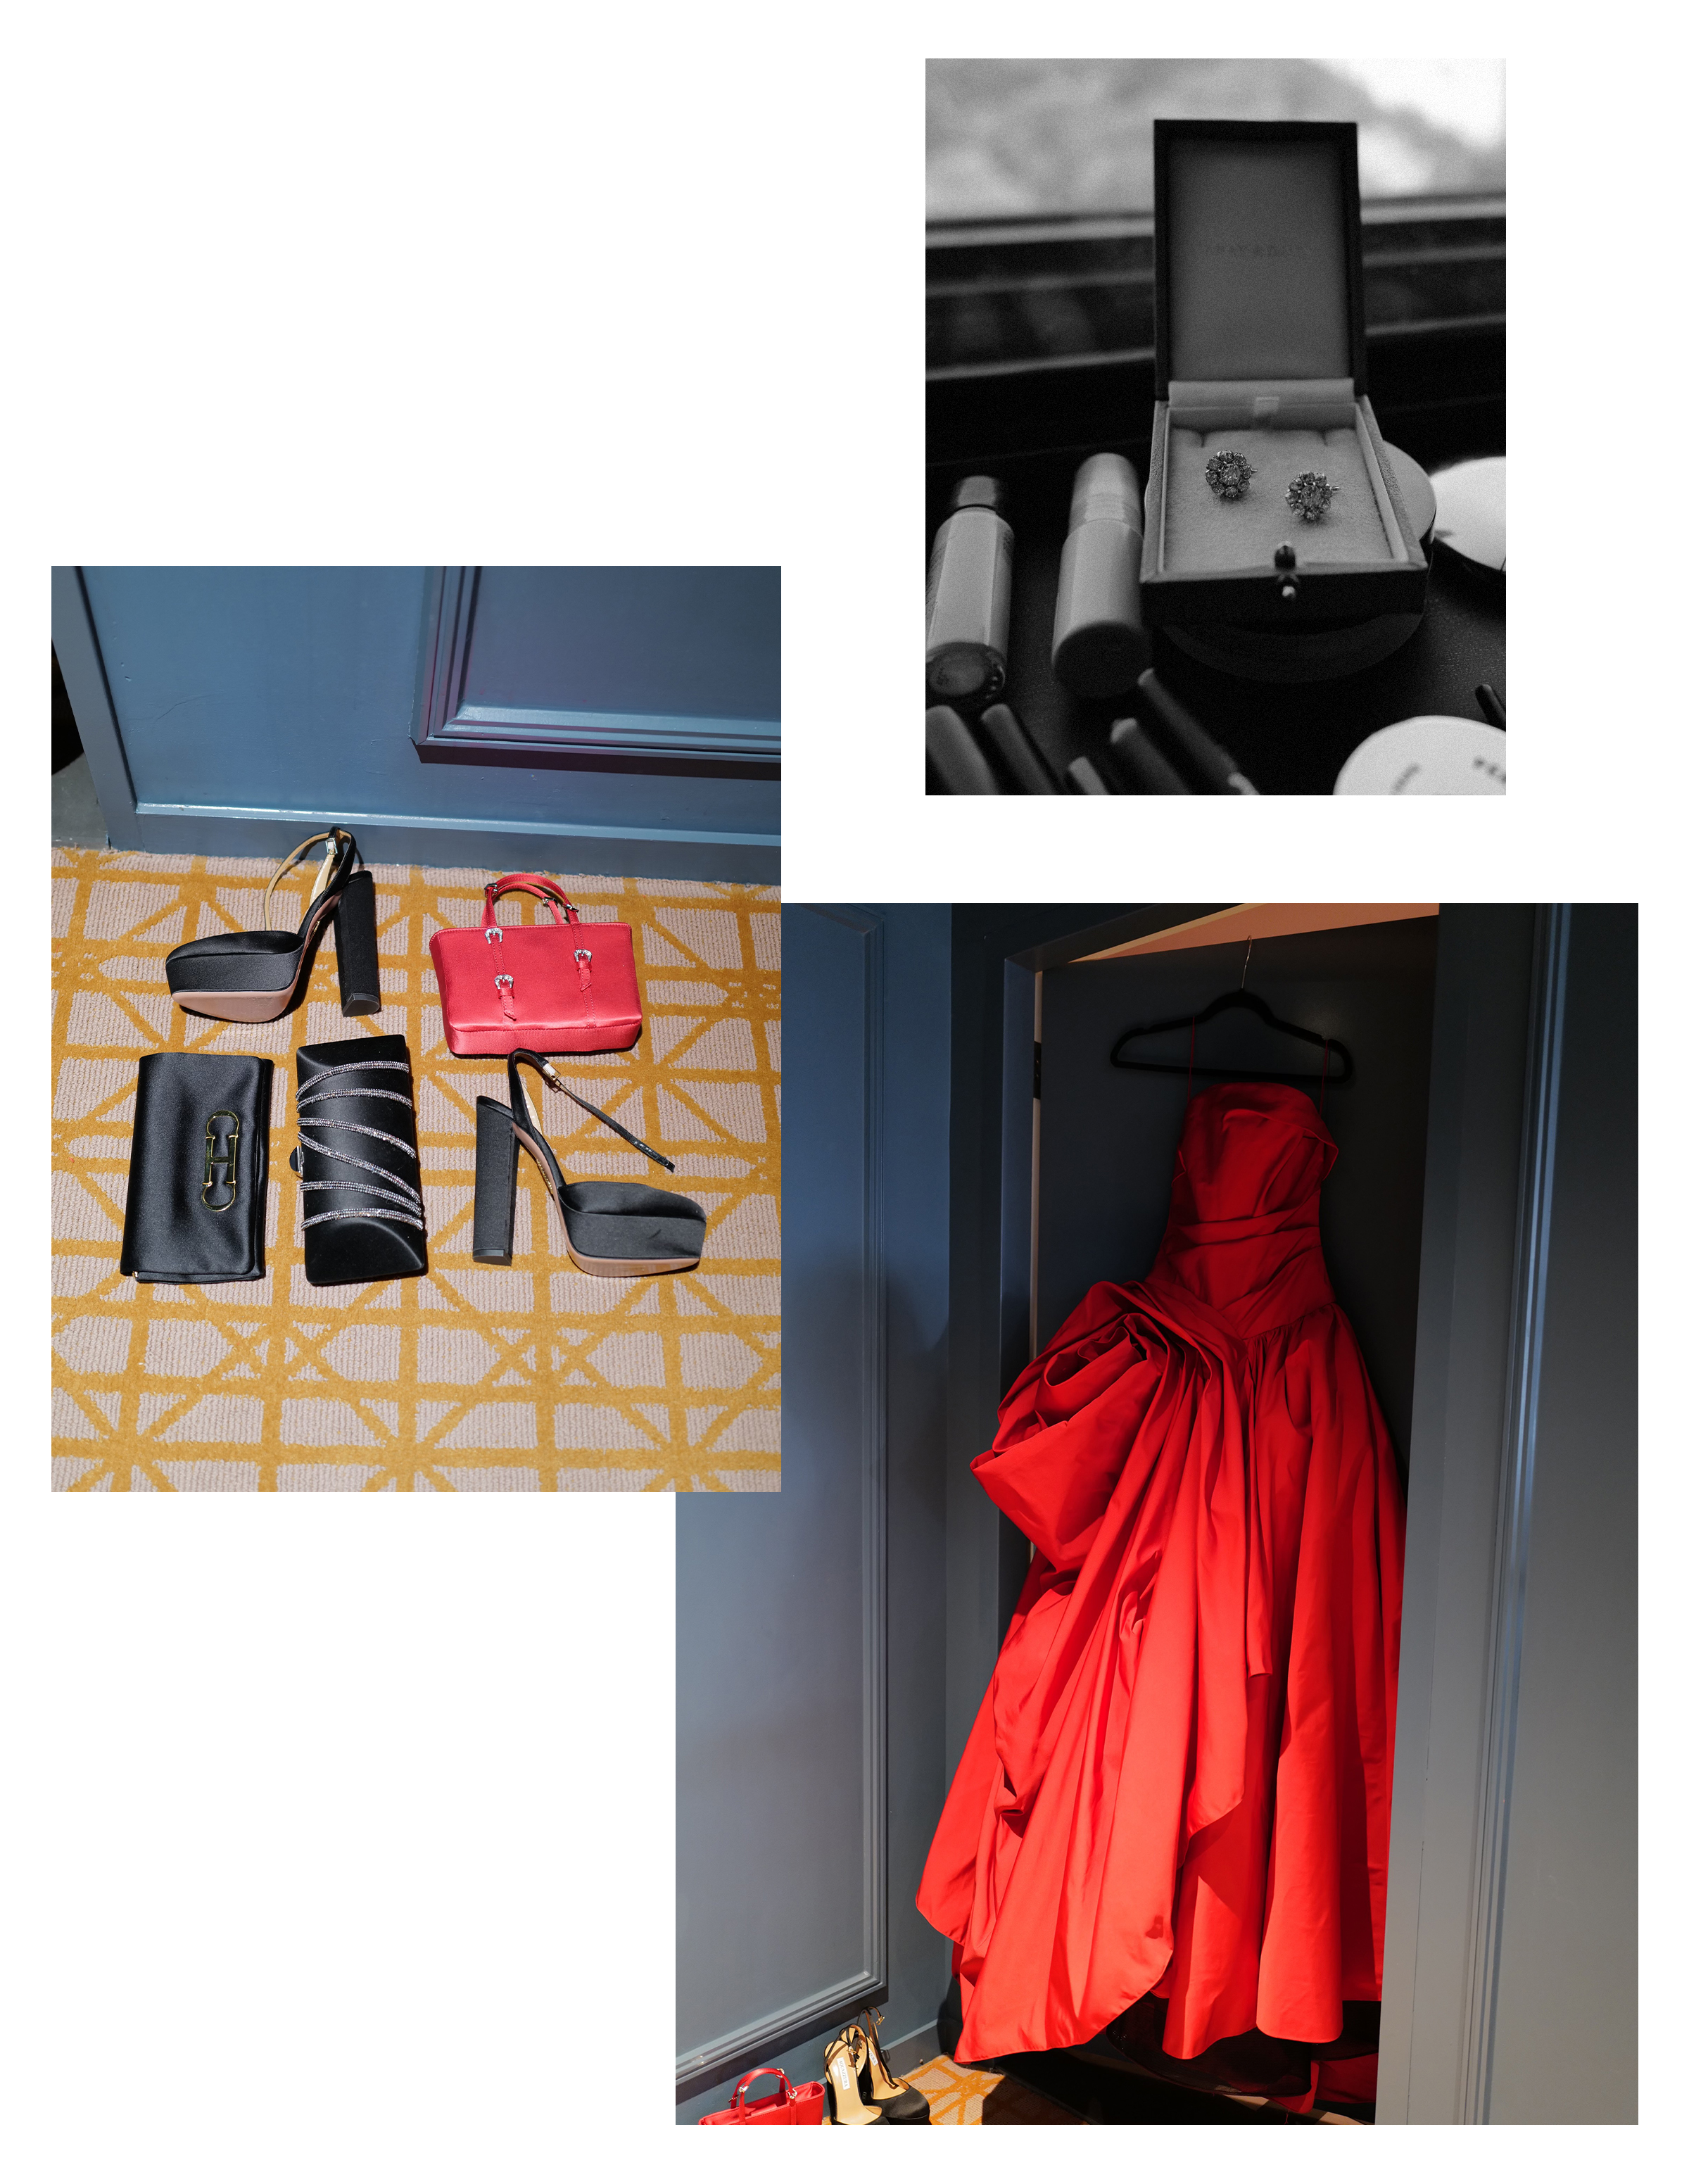 Product shots of Mckenna Grace's Marchesa gown and accessories.